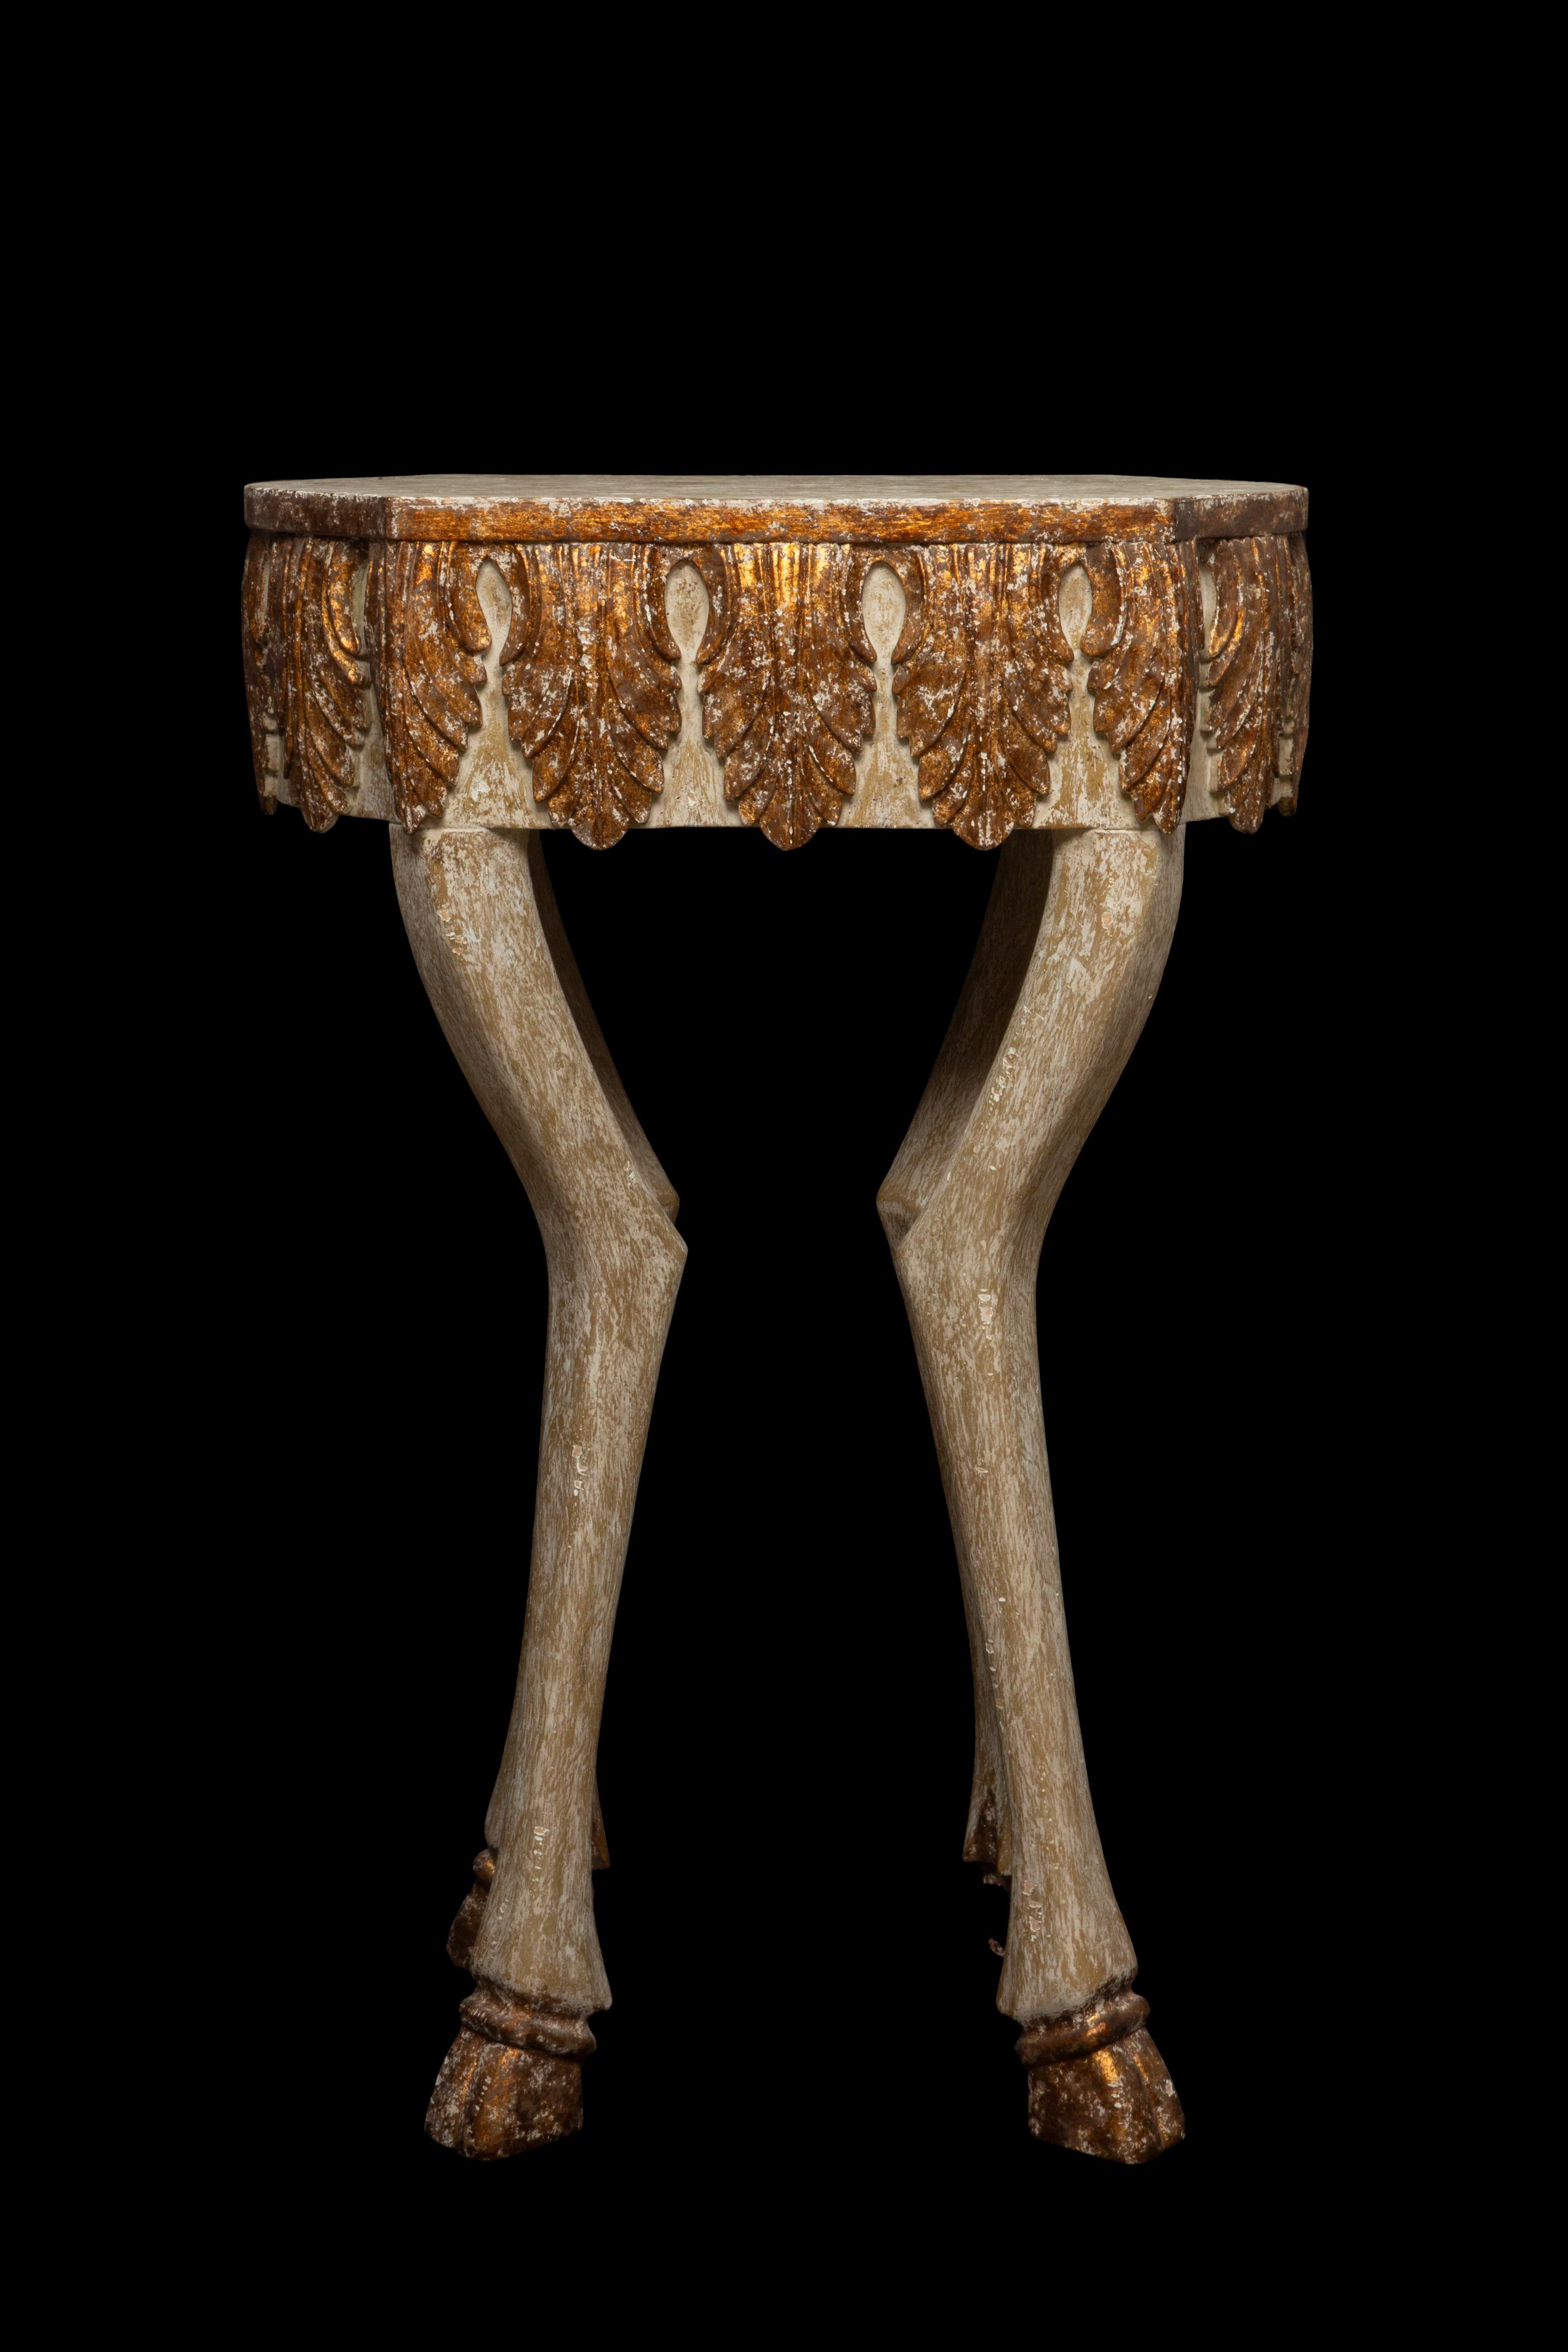 Exquisite Carved Wood Side Table featuring a stunning white-washed finish adorned with delicate gilded accents, all supported by intricately carved hoof legs. Crafted with meticulous attention to detail, this charming side table from the renowned